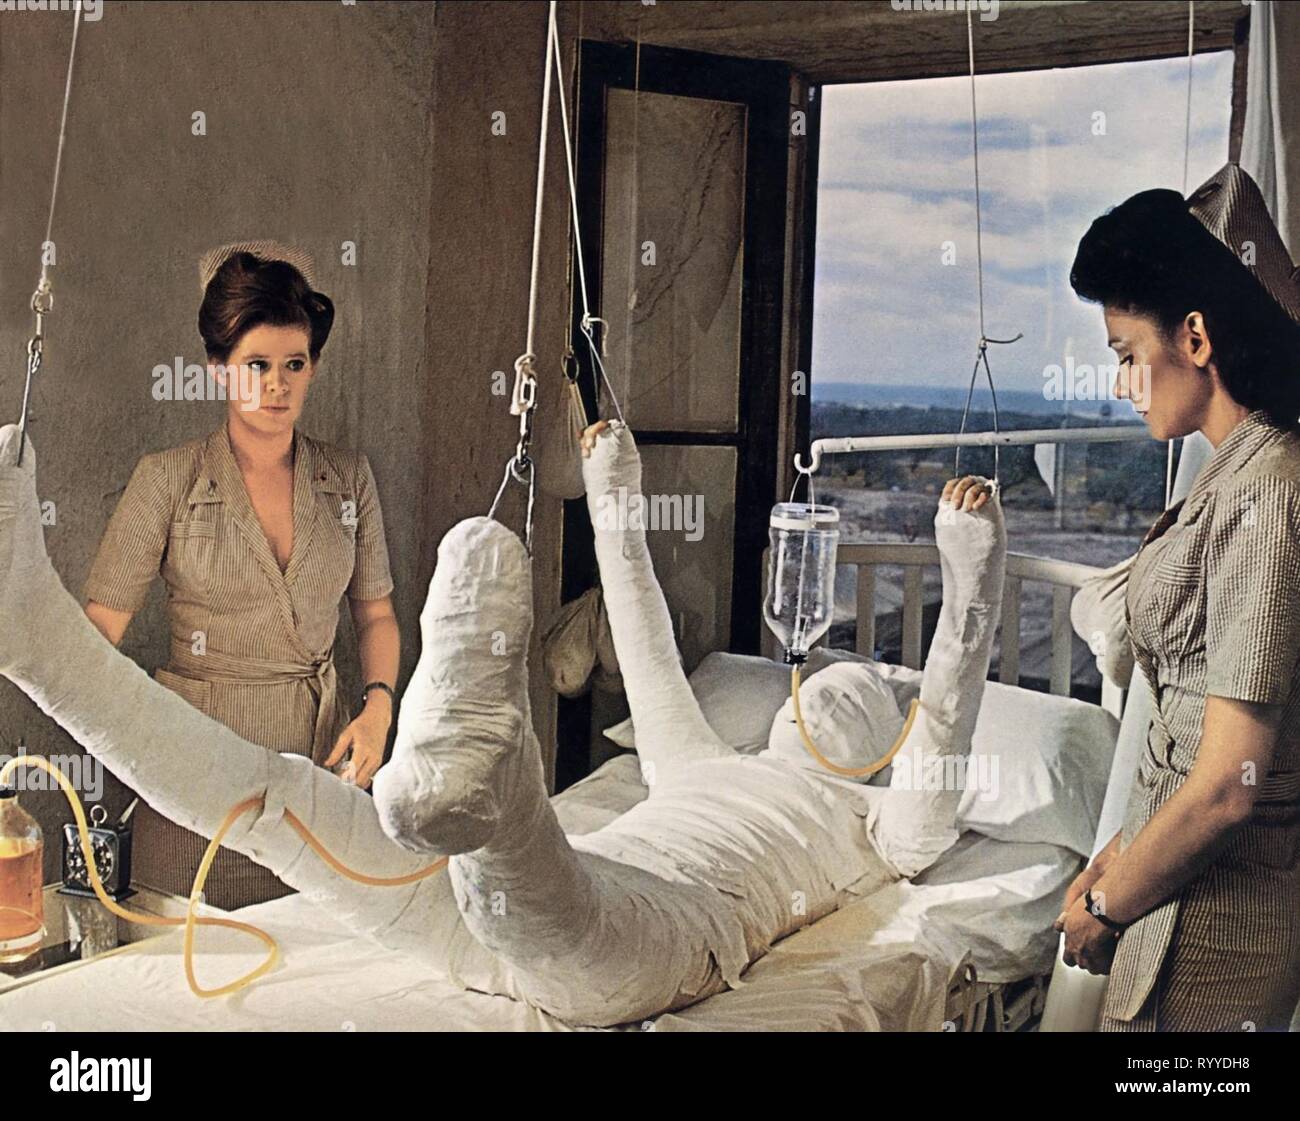 Bandaged Hospital High Resolution Stock Photography and Images - Alamy